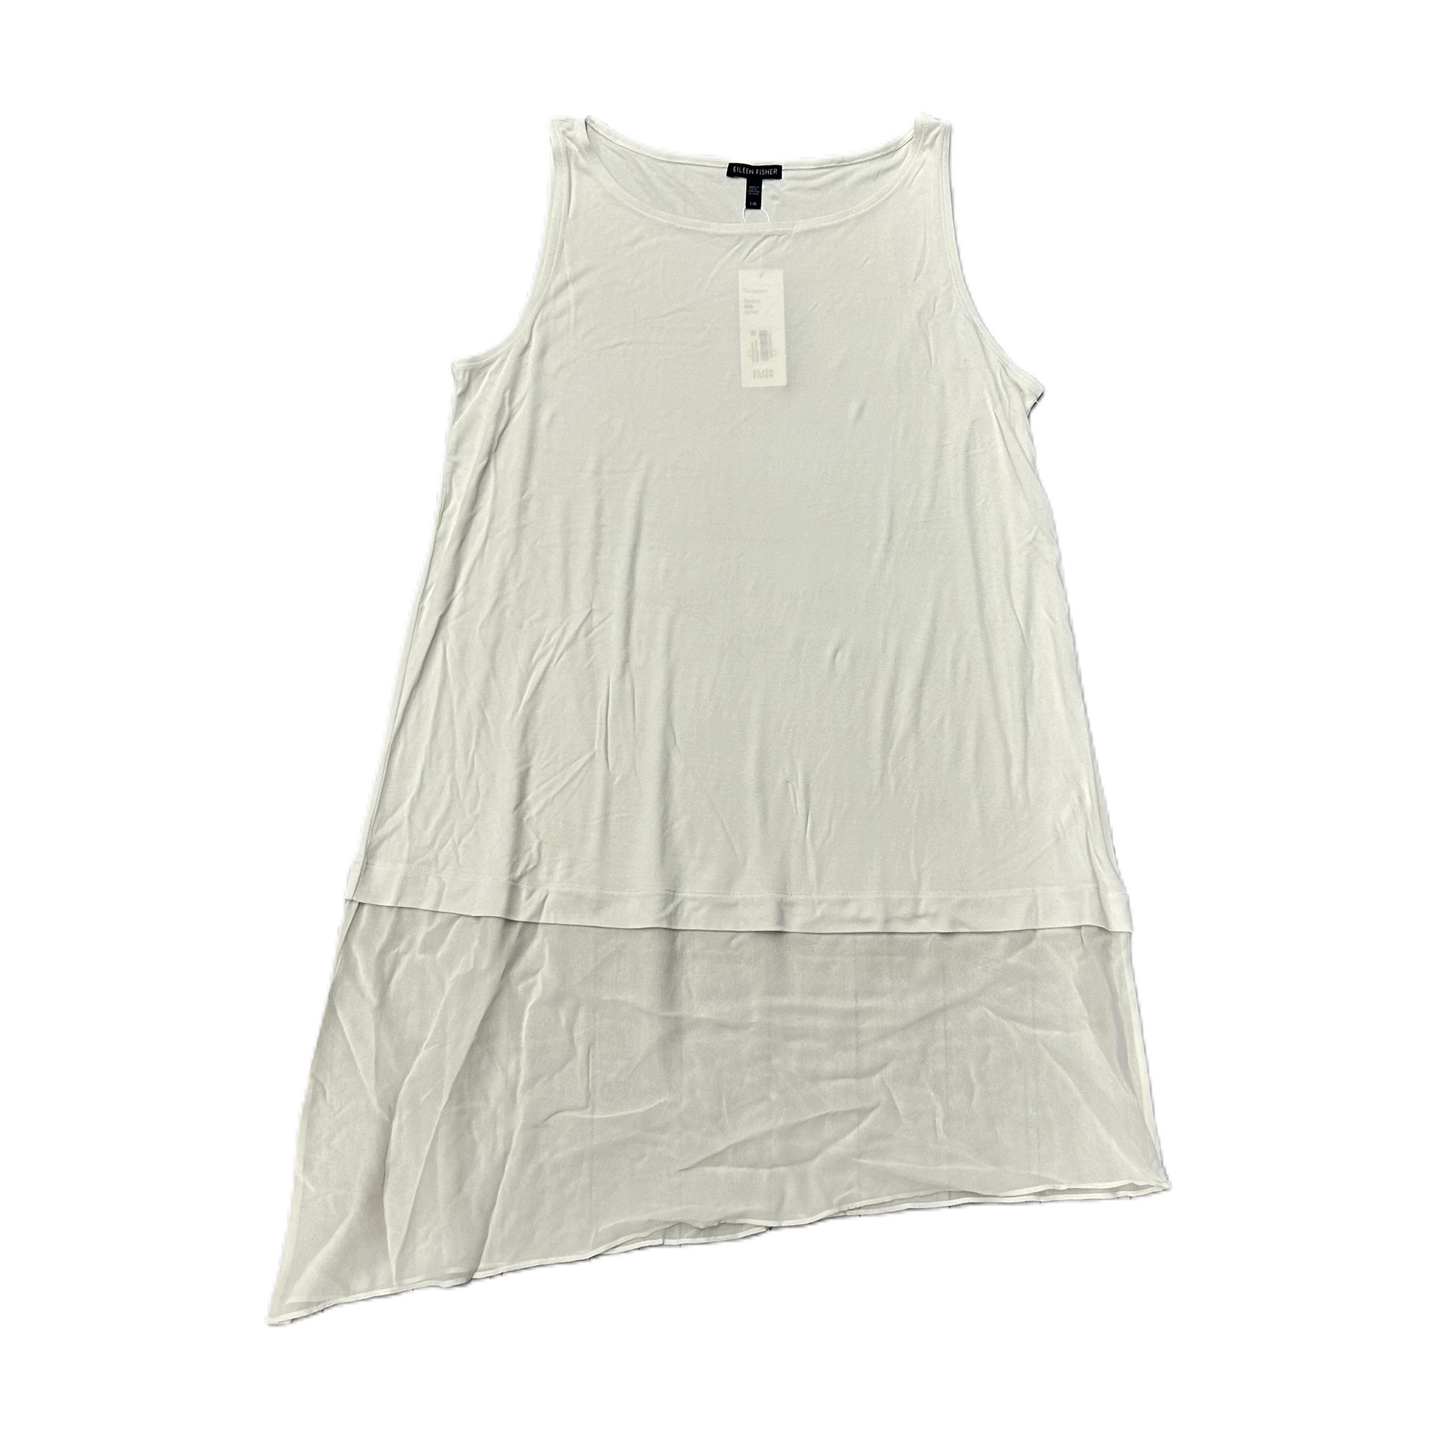 Cream Top Sleeveless By Eileen Fisher, Size: L